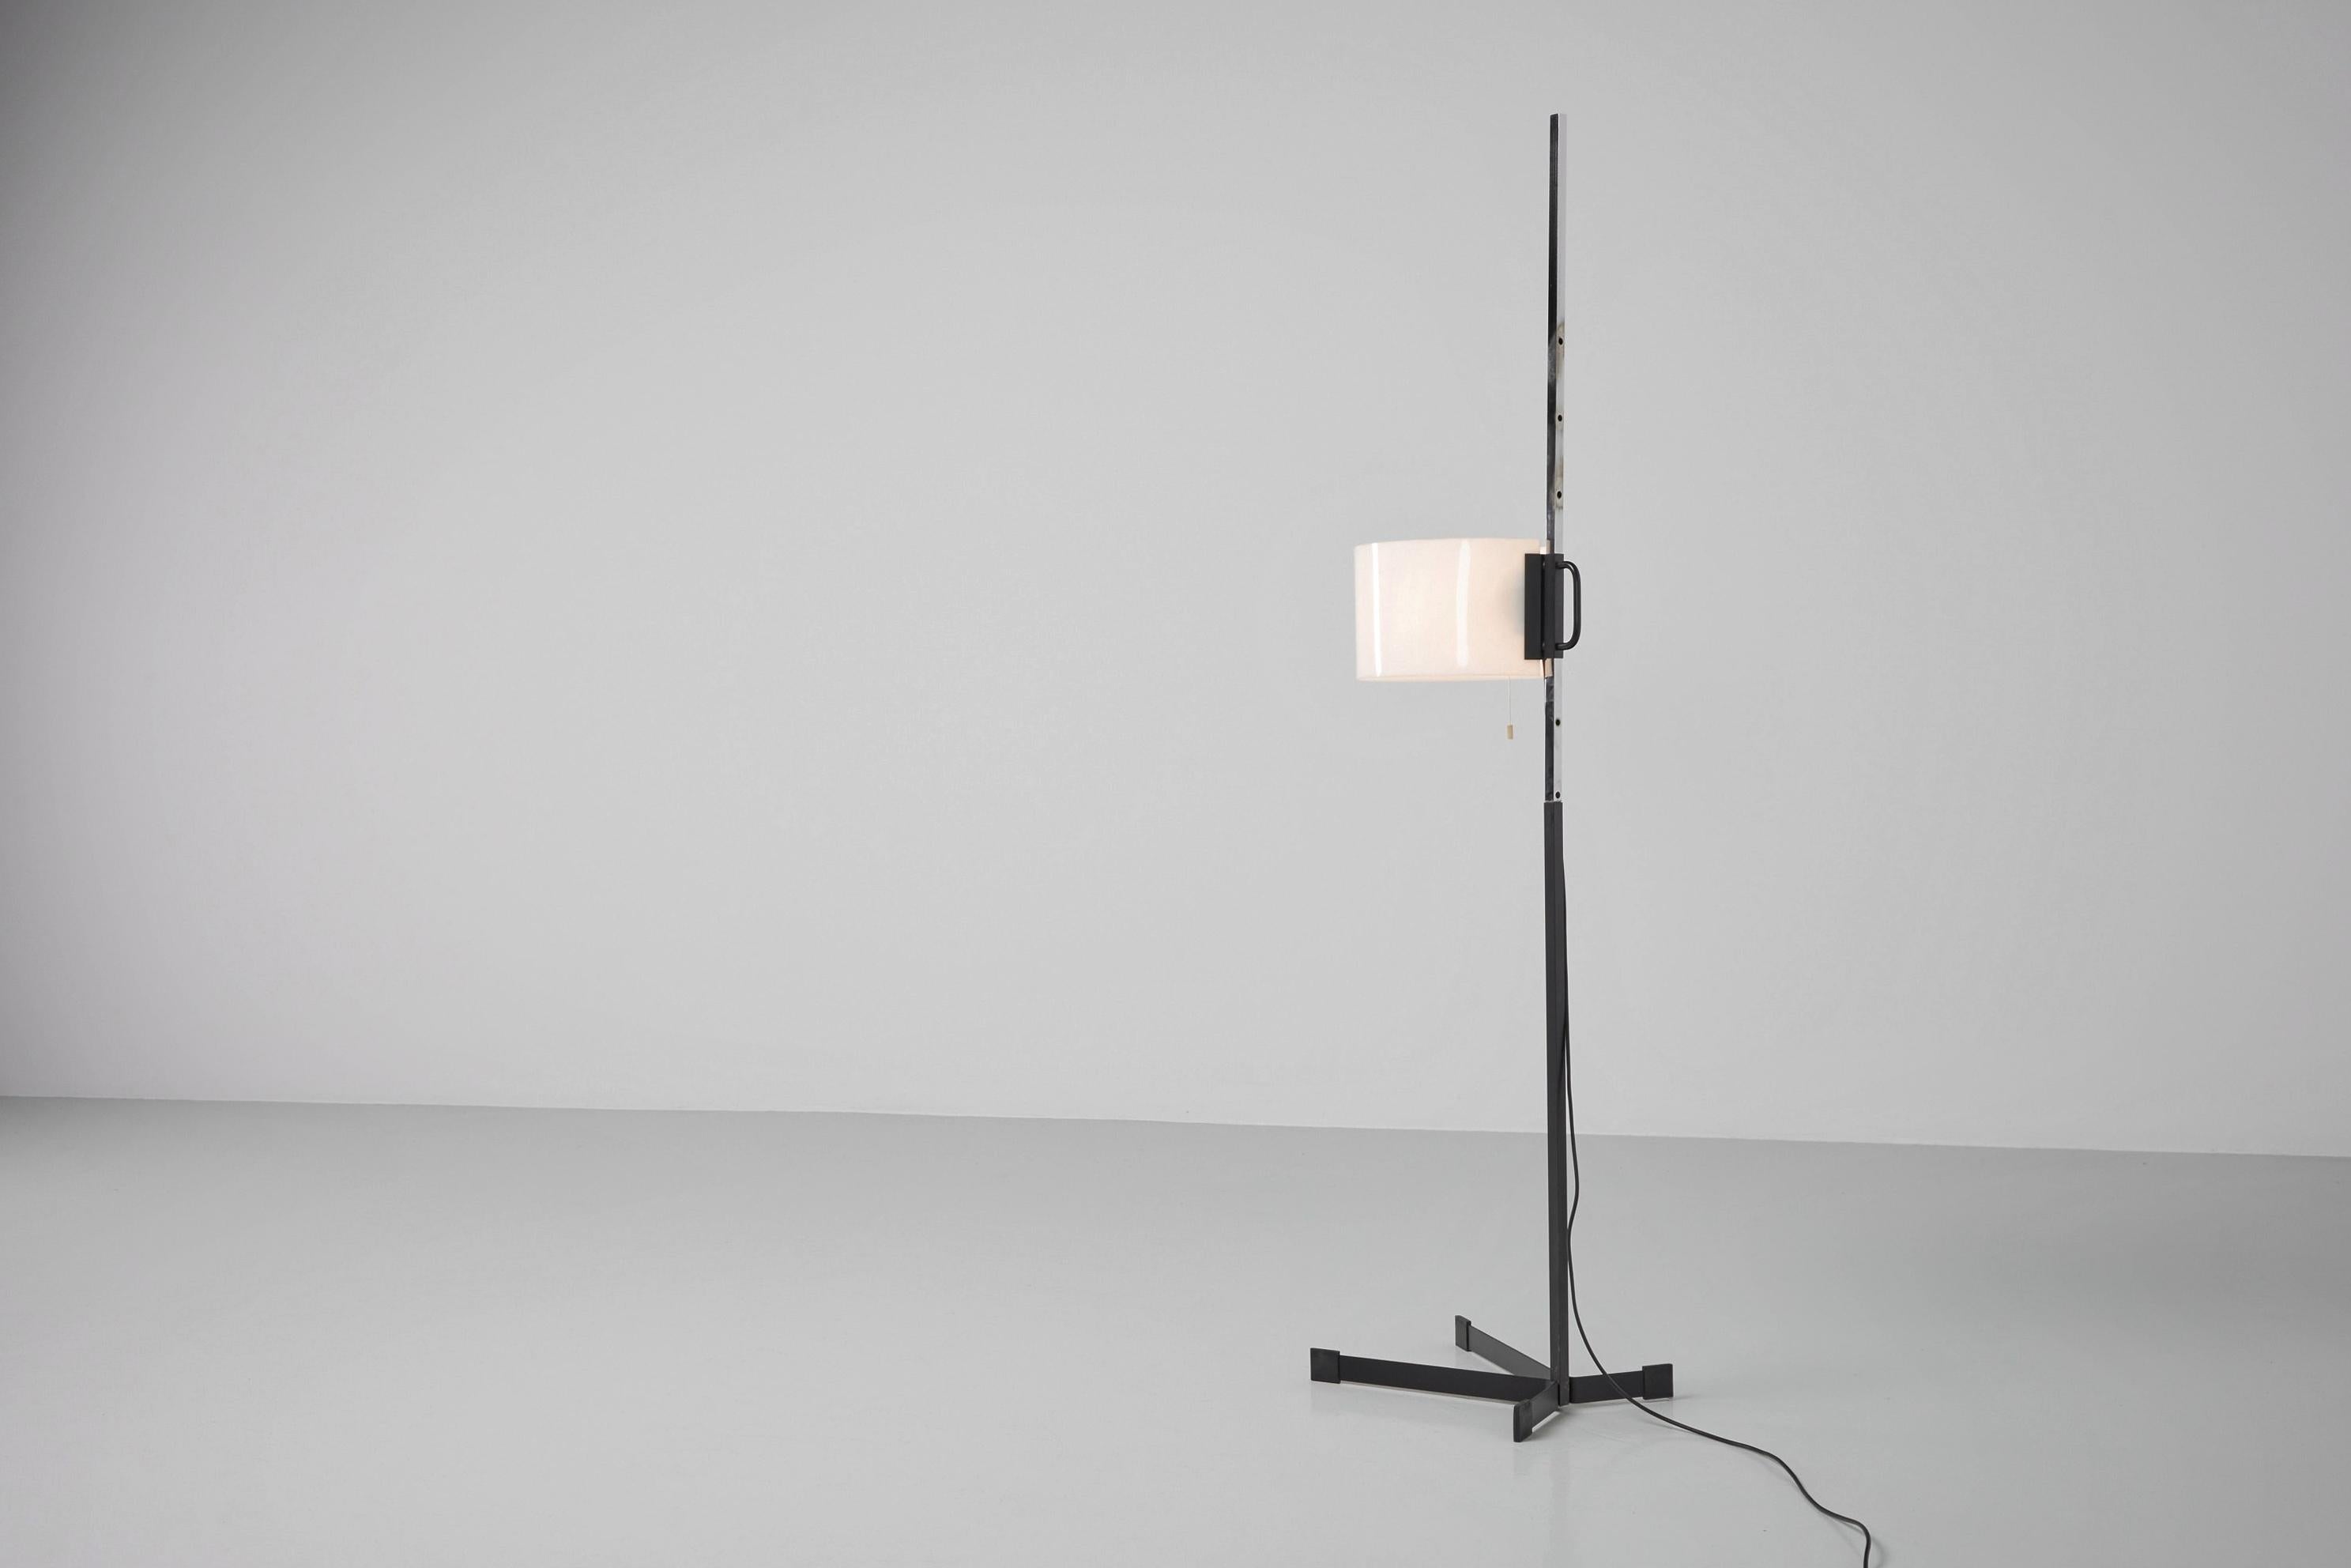 Rare floor TMC floor lamp designed by Miguel Milá and manufactured by Tramo, Spain 1950. This floor lamp is from the first production and has a very minimalistic appearance. The unusual shaped base is made of black painted metal, it has an